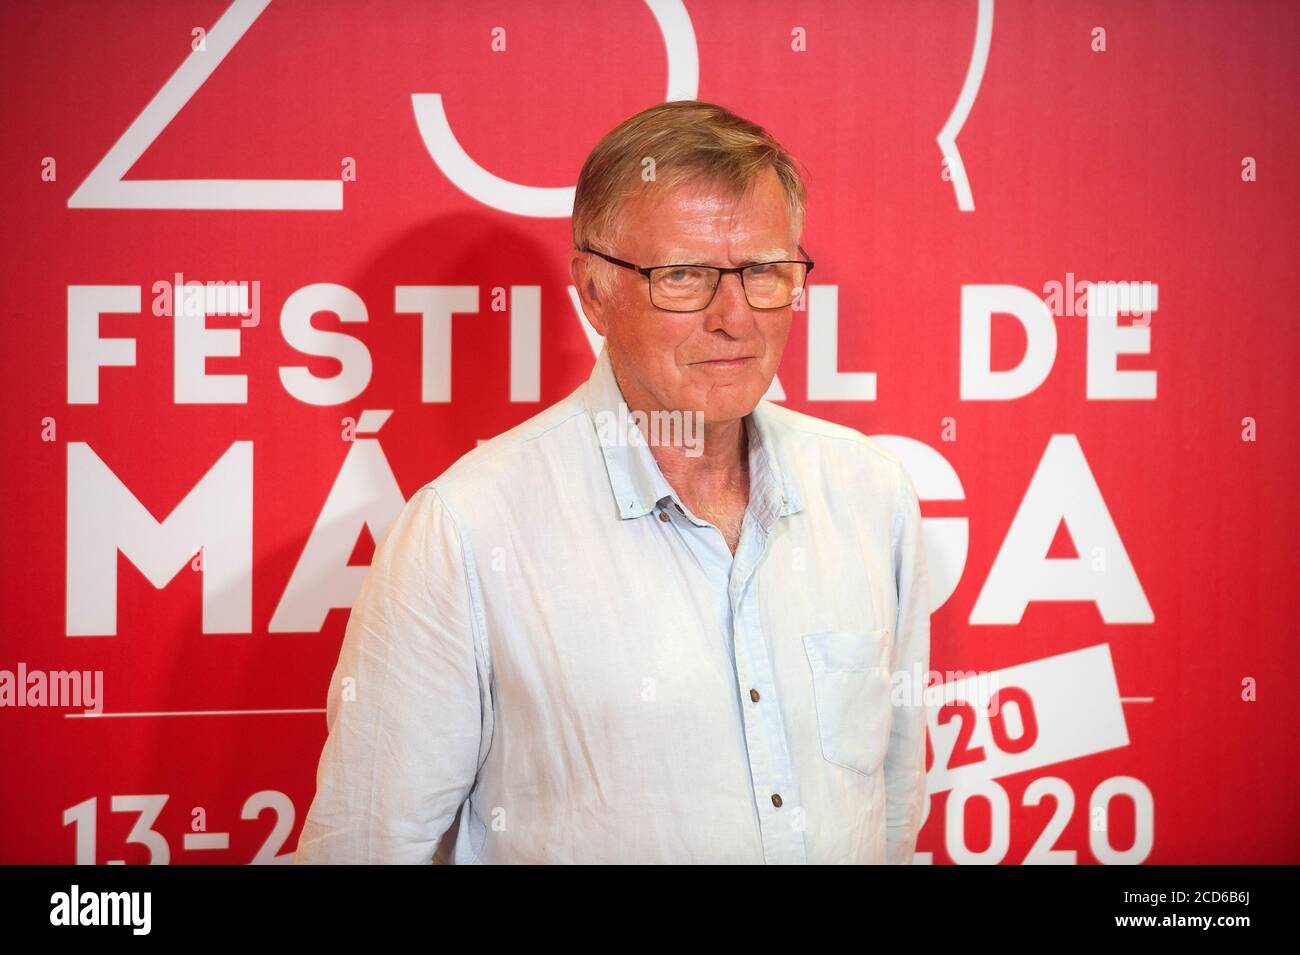 Malaga, Spain. 26th Aug, 2020. British producer and director of Europe 20th Century Fox Peter Beale attends the Malaga Film Festival at Miramar Hotel.The 23rd edition of the Spanish Malaga Film Festival is the first great cinematographic event in Spain after it was postponed due to coronavirus pandemic last month of March. The organization has introduced measures to prevent the spread for coronavirus and to guarantee a secure event. The festival will be held from 21 to 30 August. Credit: SOPA Images Limited/Alamy Live News Stock Photo